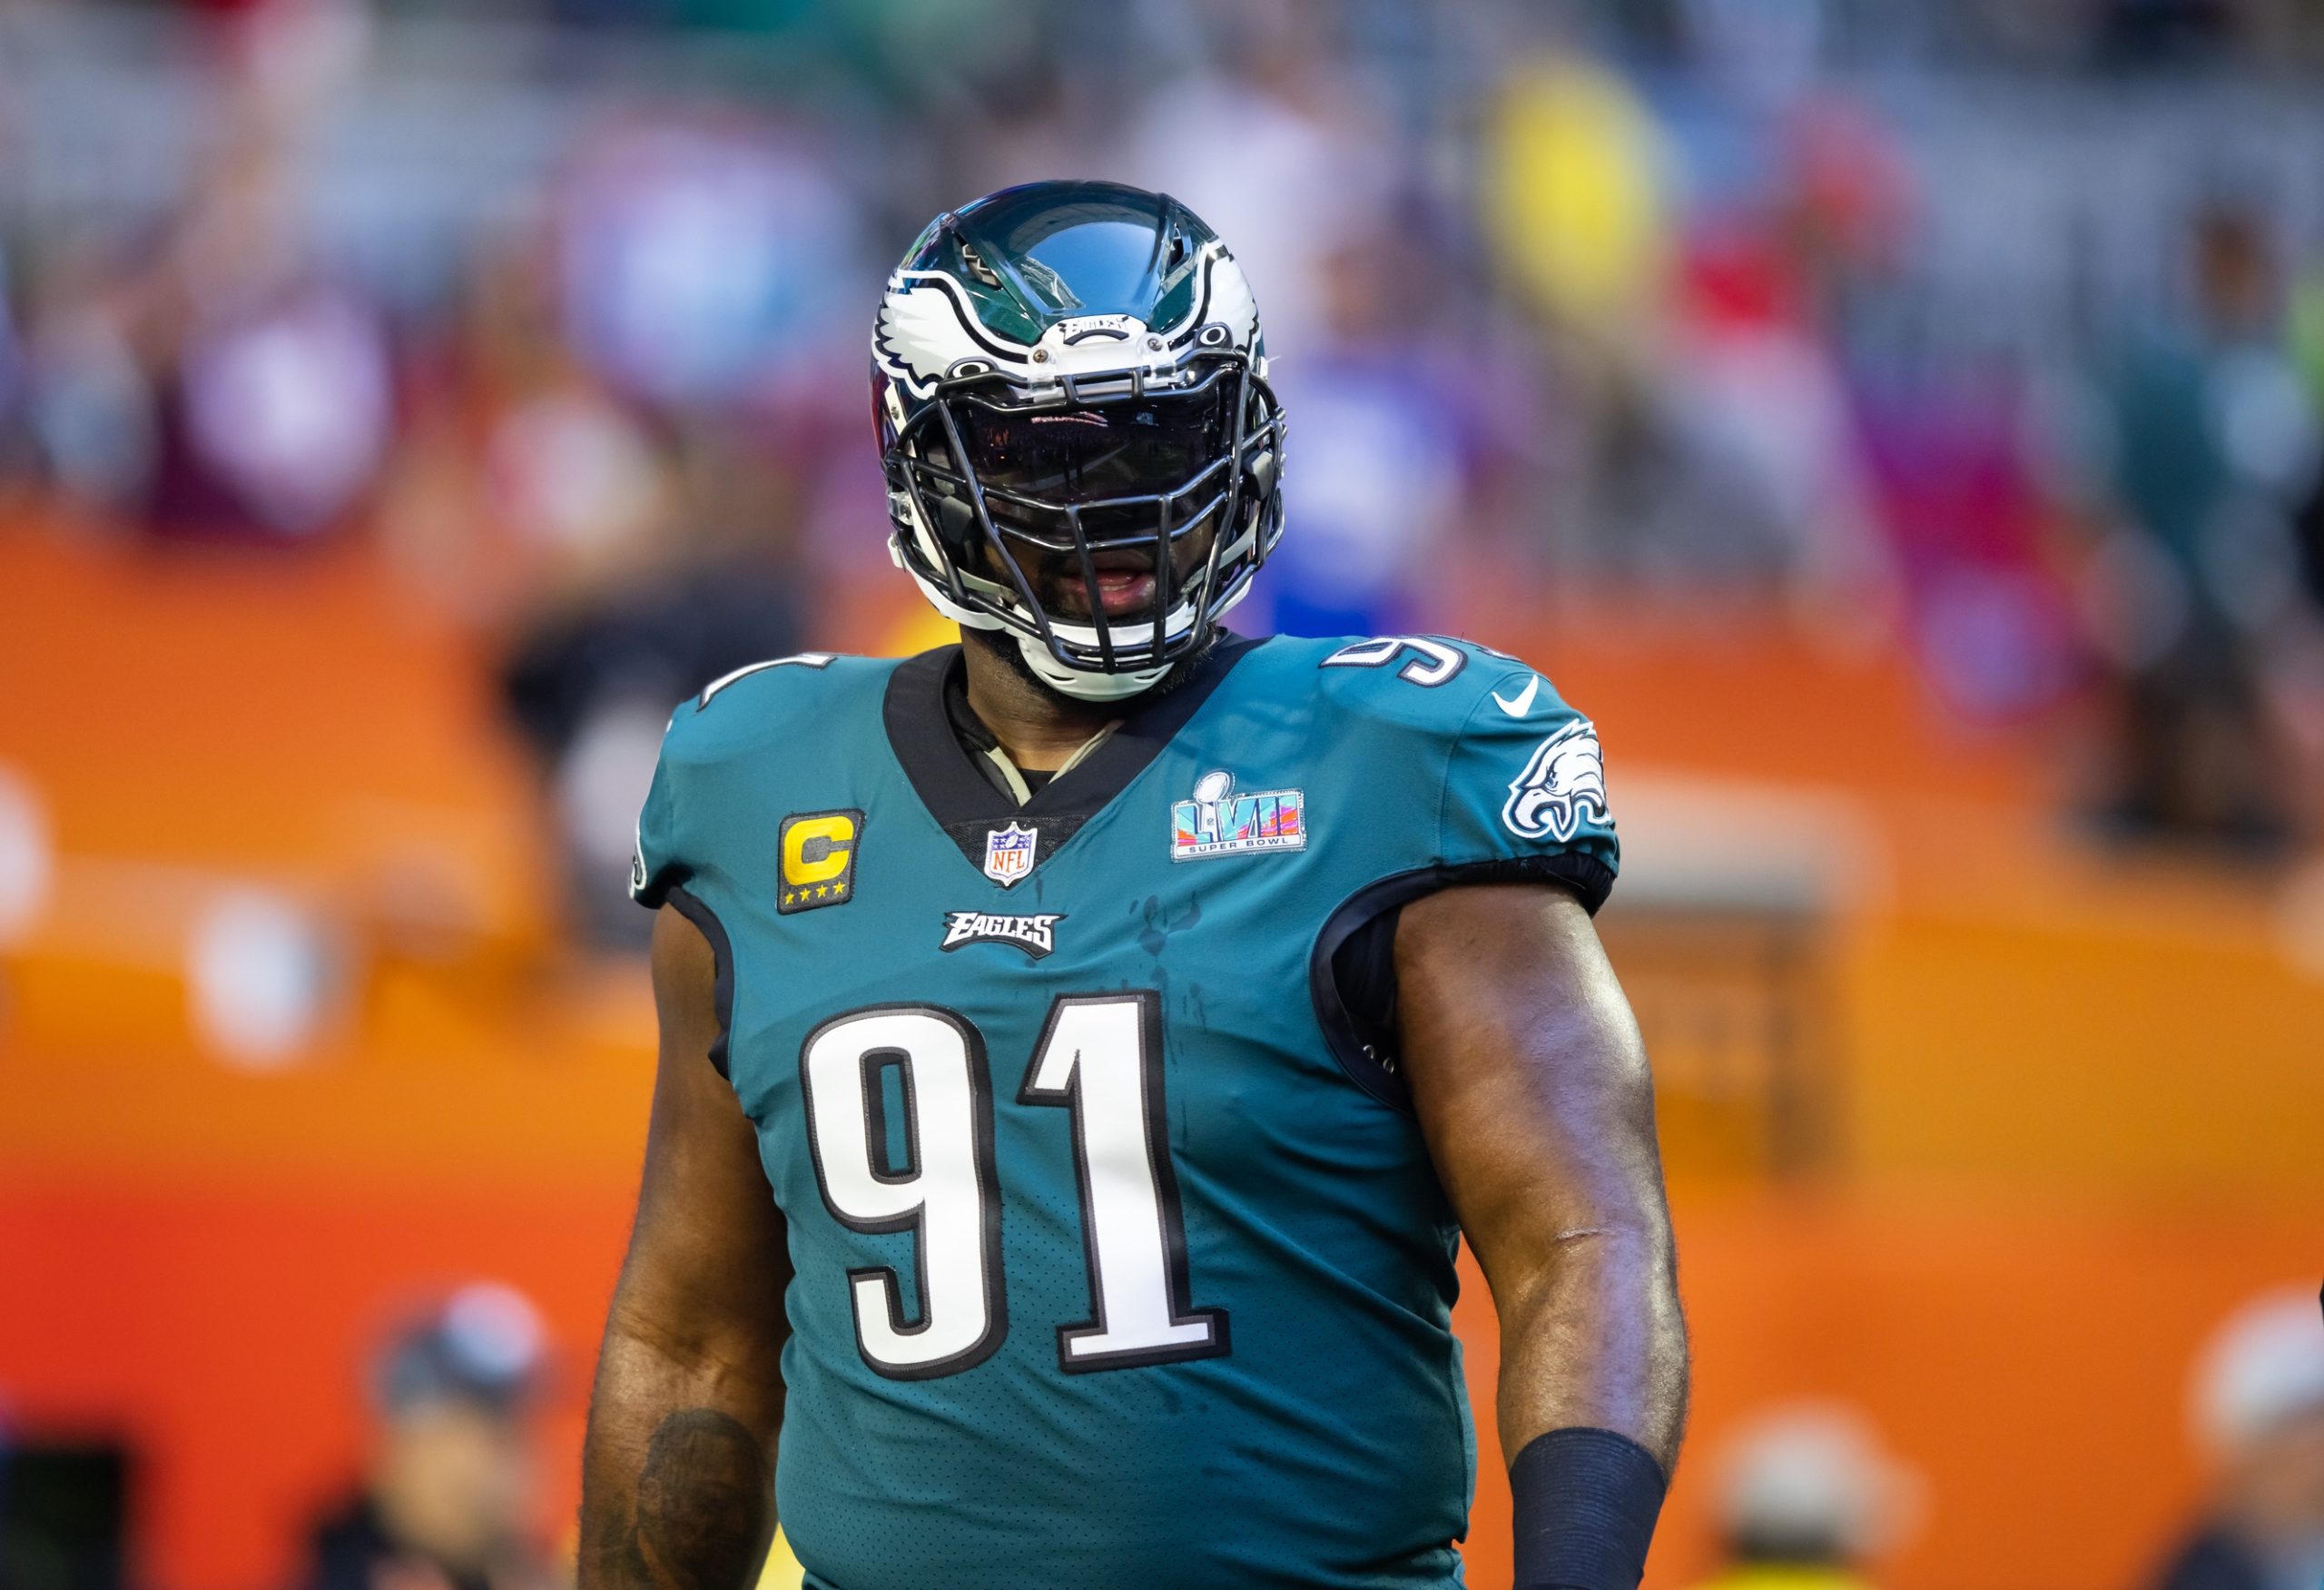 Philadelphia Eagles defense will be much improved in 2021